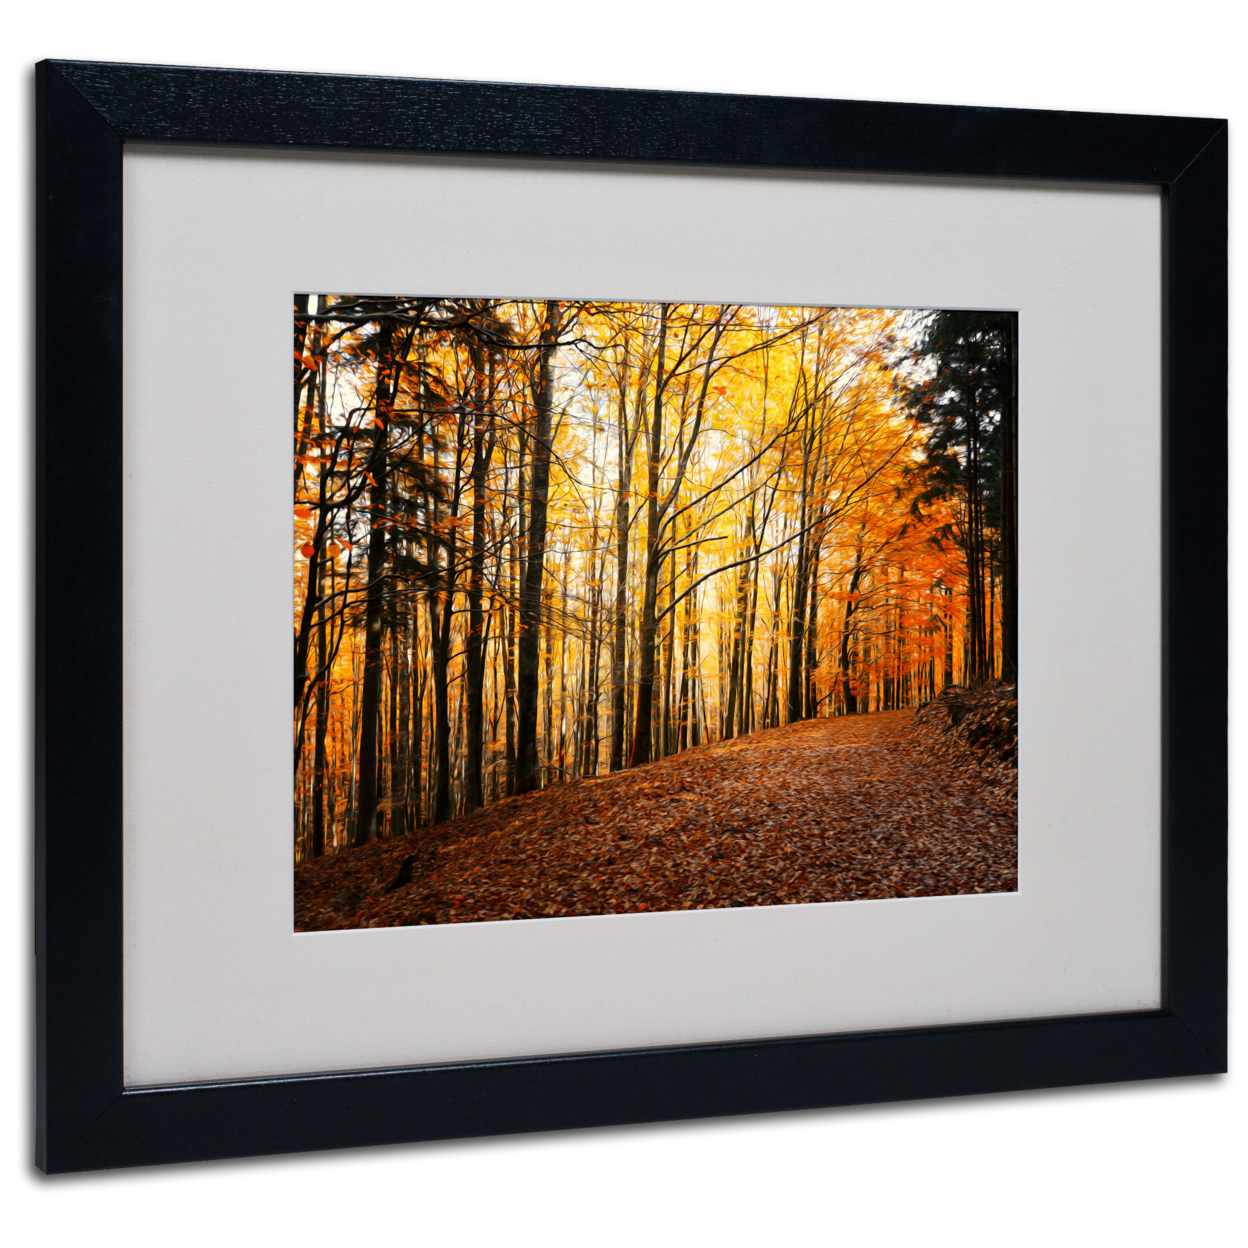 Philippe Sainte-Laudy 'Autumn Leaves' Black Wooden Framed Art 18 X 22 Inches